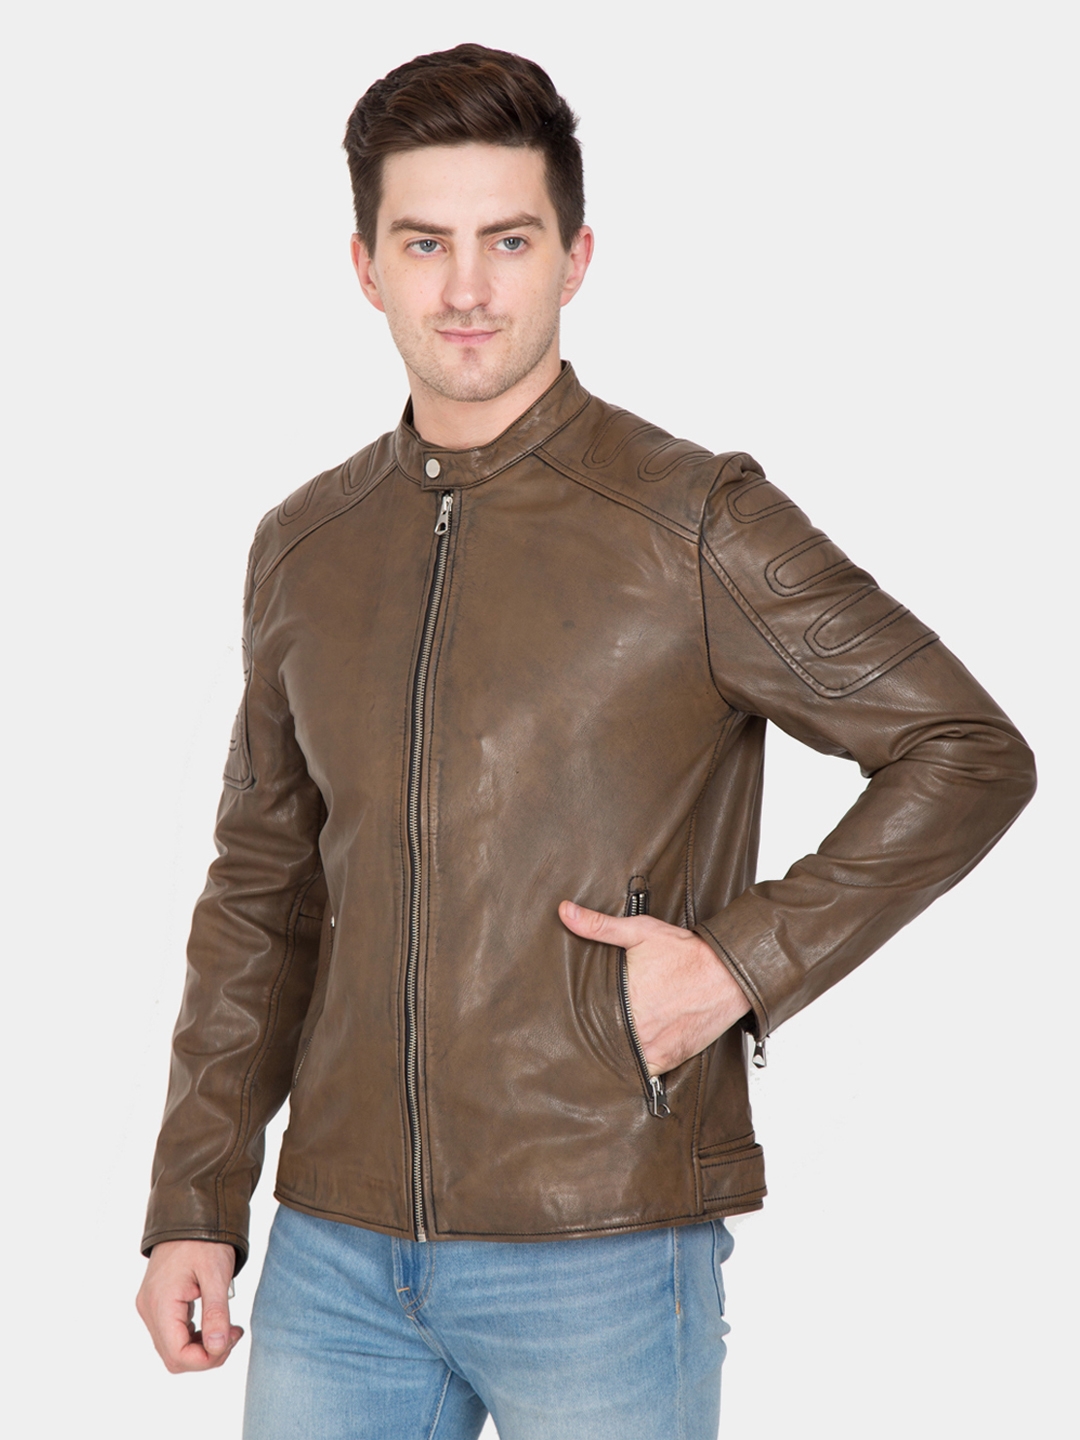 Justanned | JUSTANNED CAROB TAN LEATHER JACKET 2